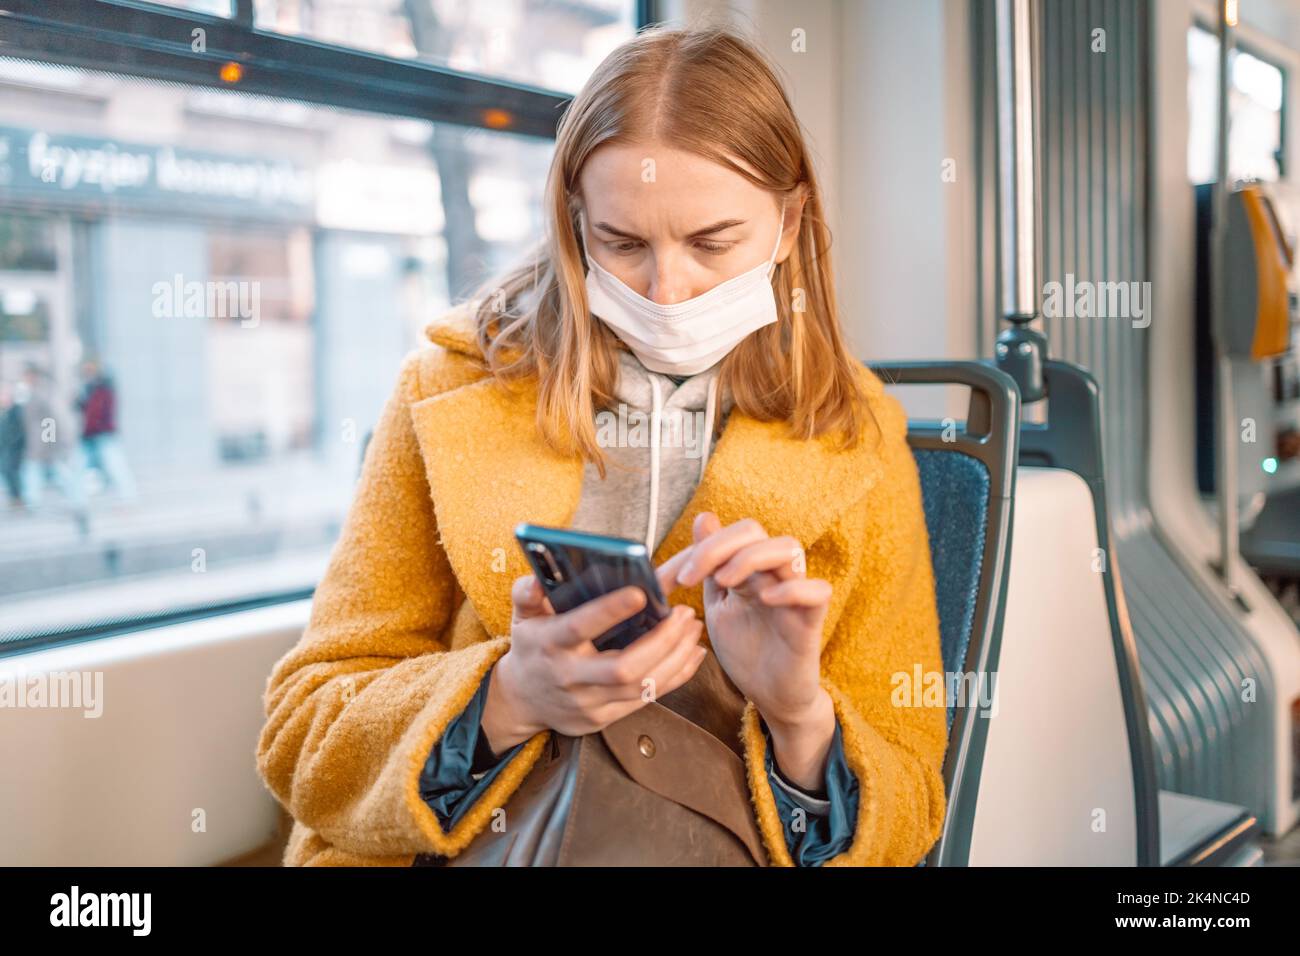 Young woman in medical mask sitting in public bus and reading news in smartphone online during pandemic Covid-19. New normal concept. Stock Photo